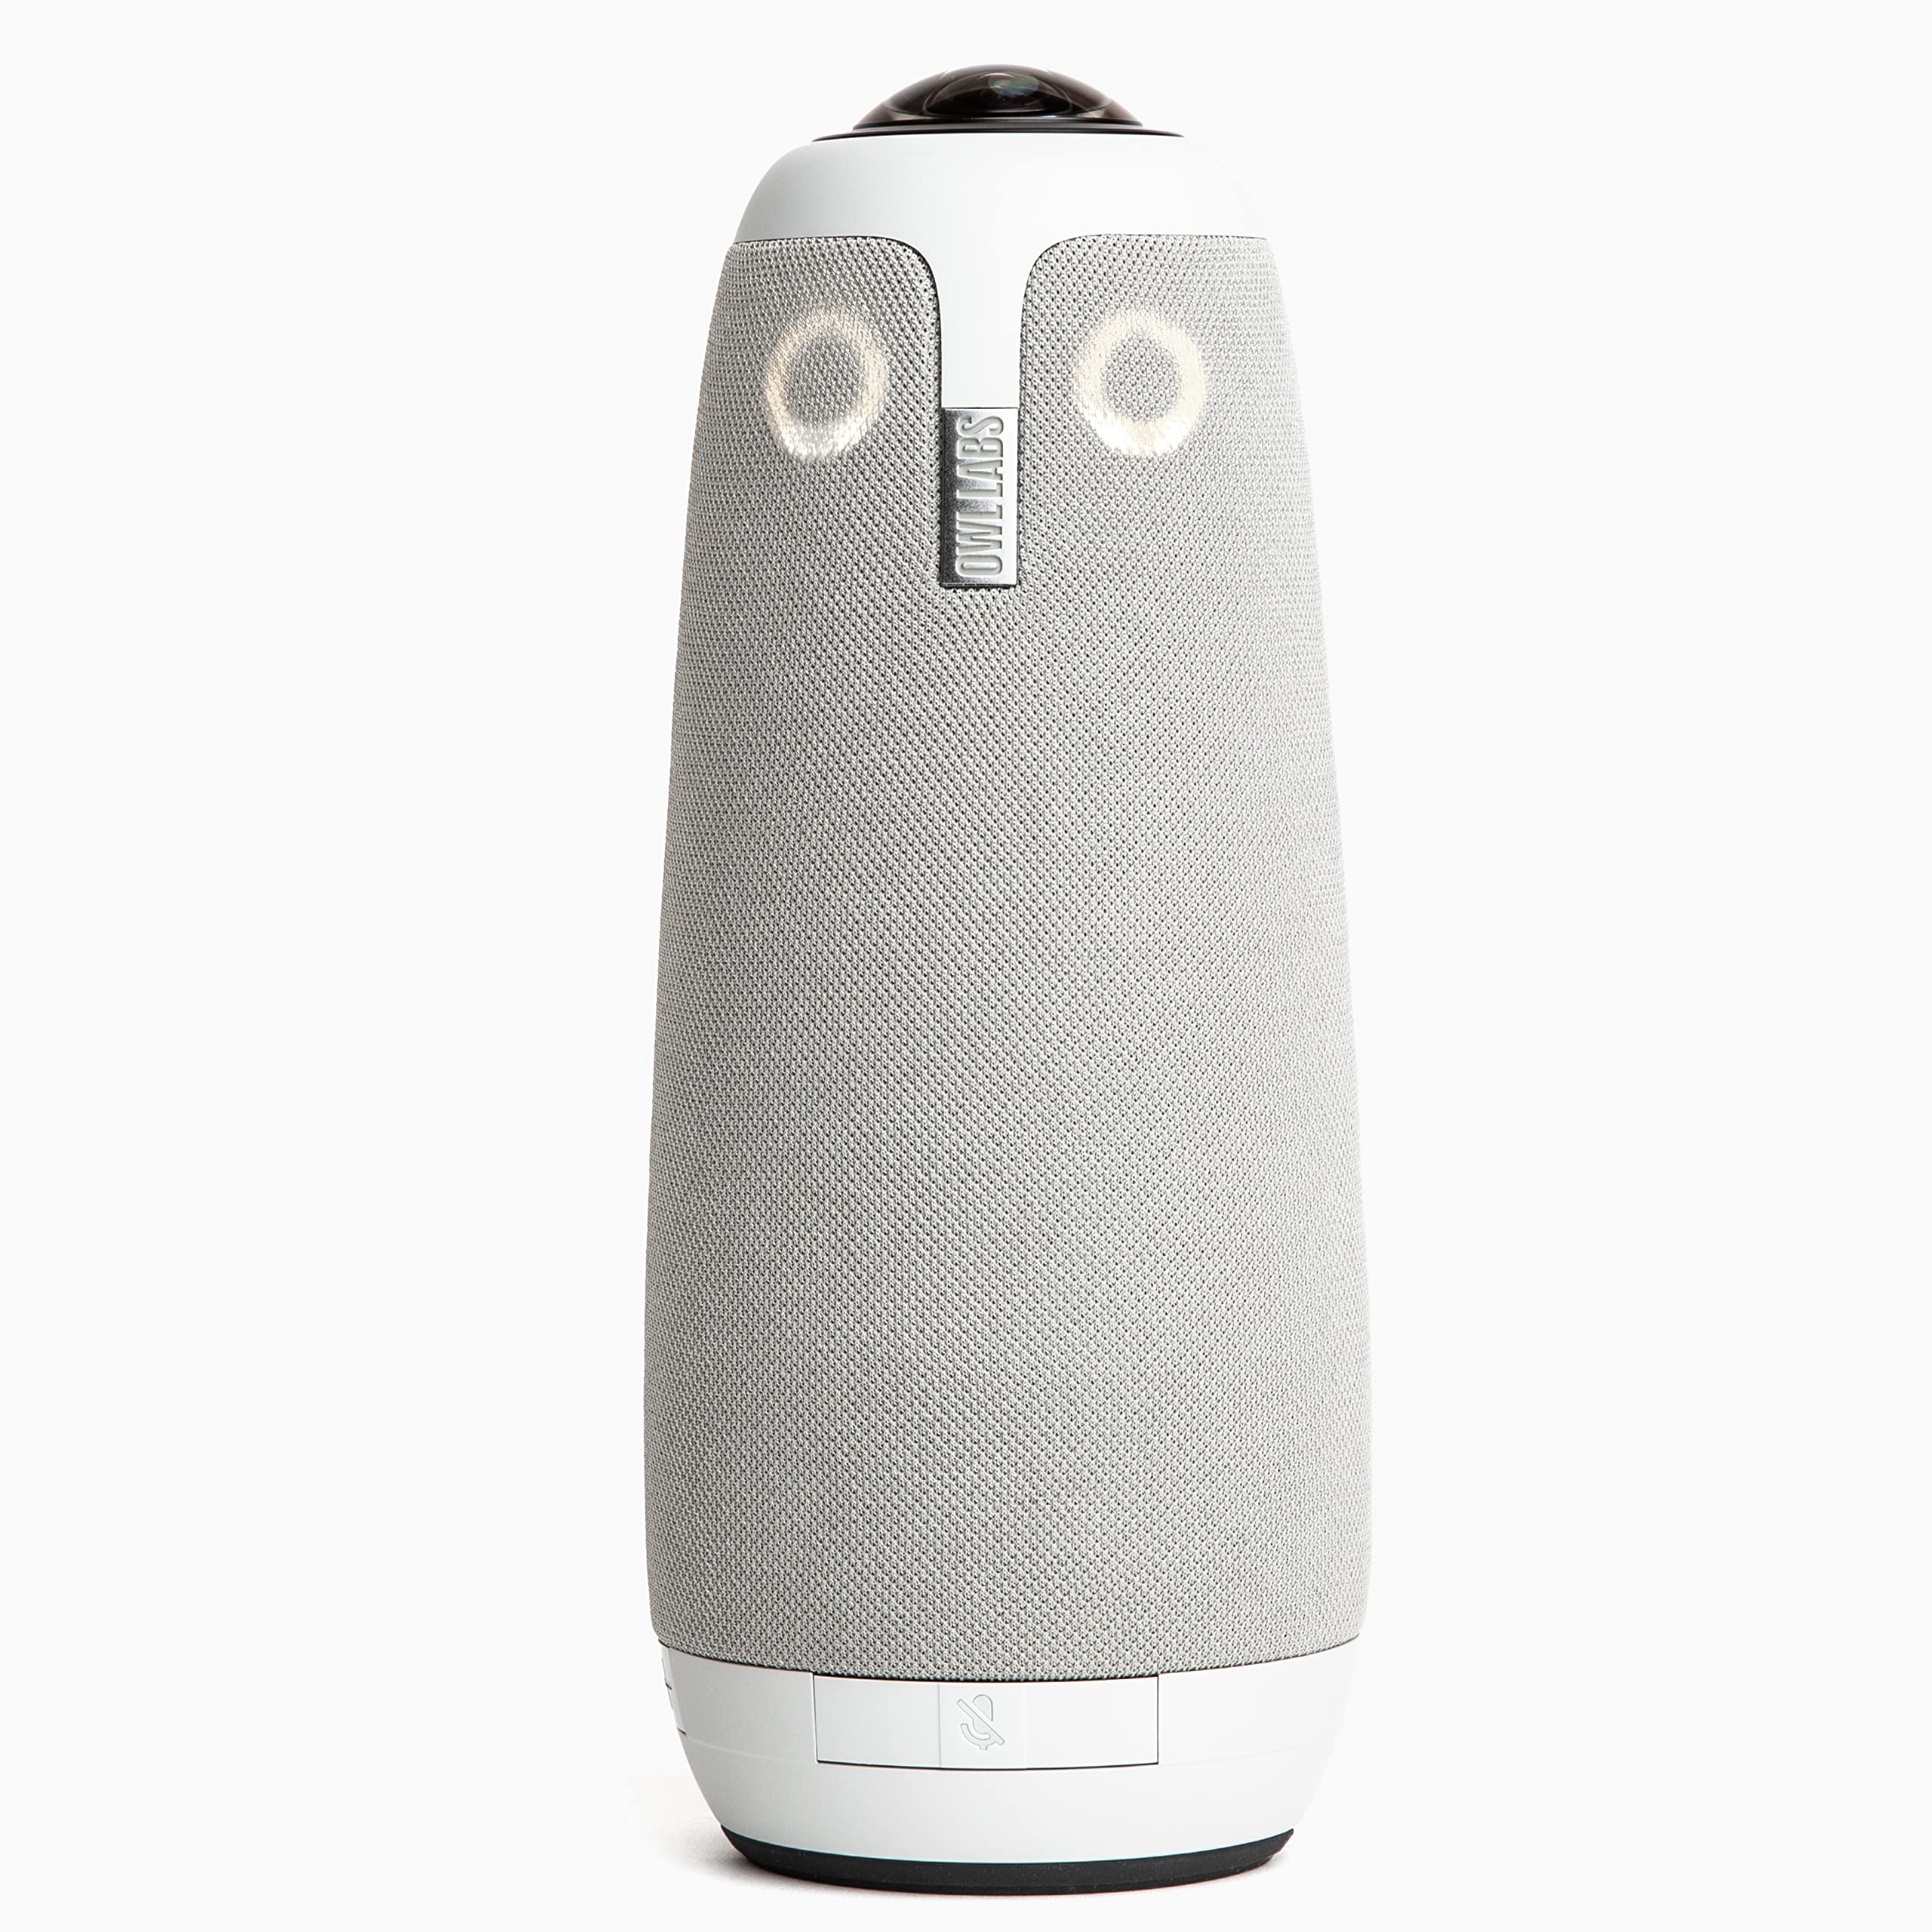 Refurbished Meeting Owl 3-360-Degree, 1080p HD Smart Video Conference Camera, Microphone, and Speaker (Automatic Speaker Focus & Smart Zooming and Noise Equalizing) (Renewed Premium)